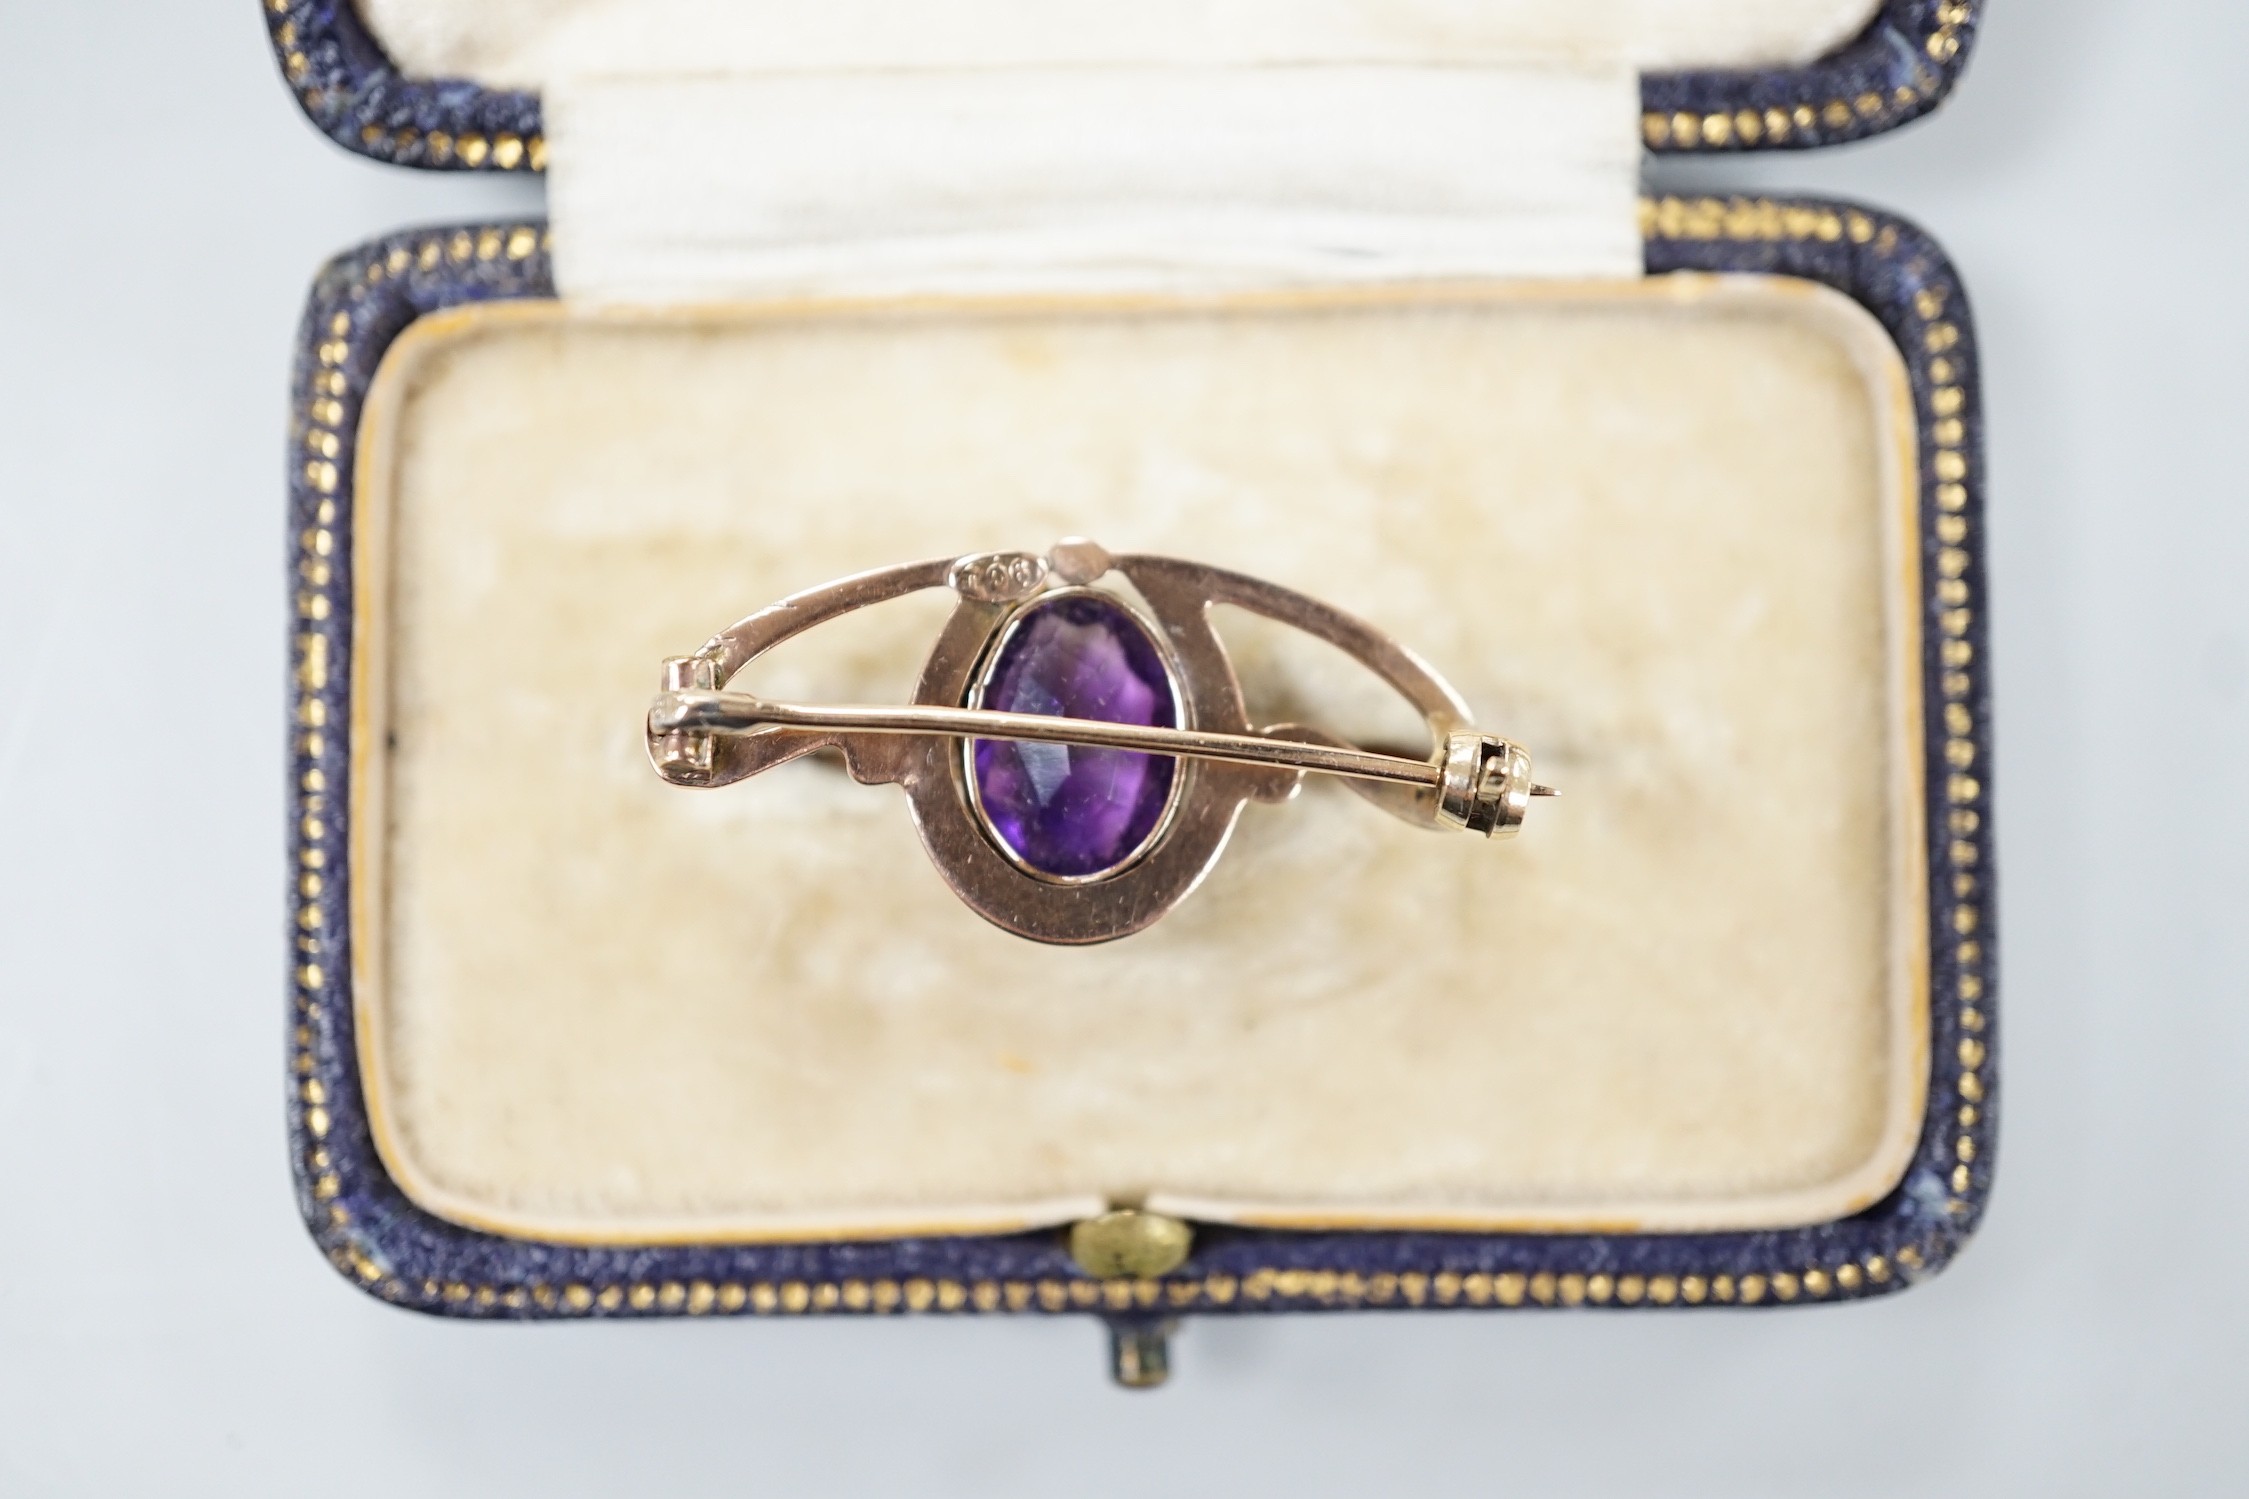 An Edwardian Art Nouveau 9ct and single stone oval cut amethyst set brooch, 31mm, gross weight 2.2 grams, in fitted gilt tooled leather box.